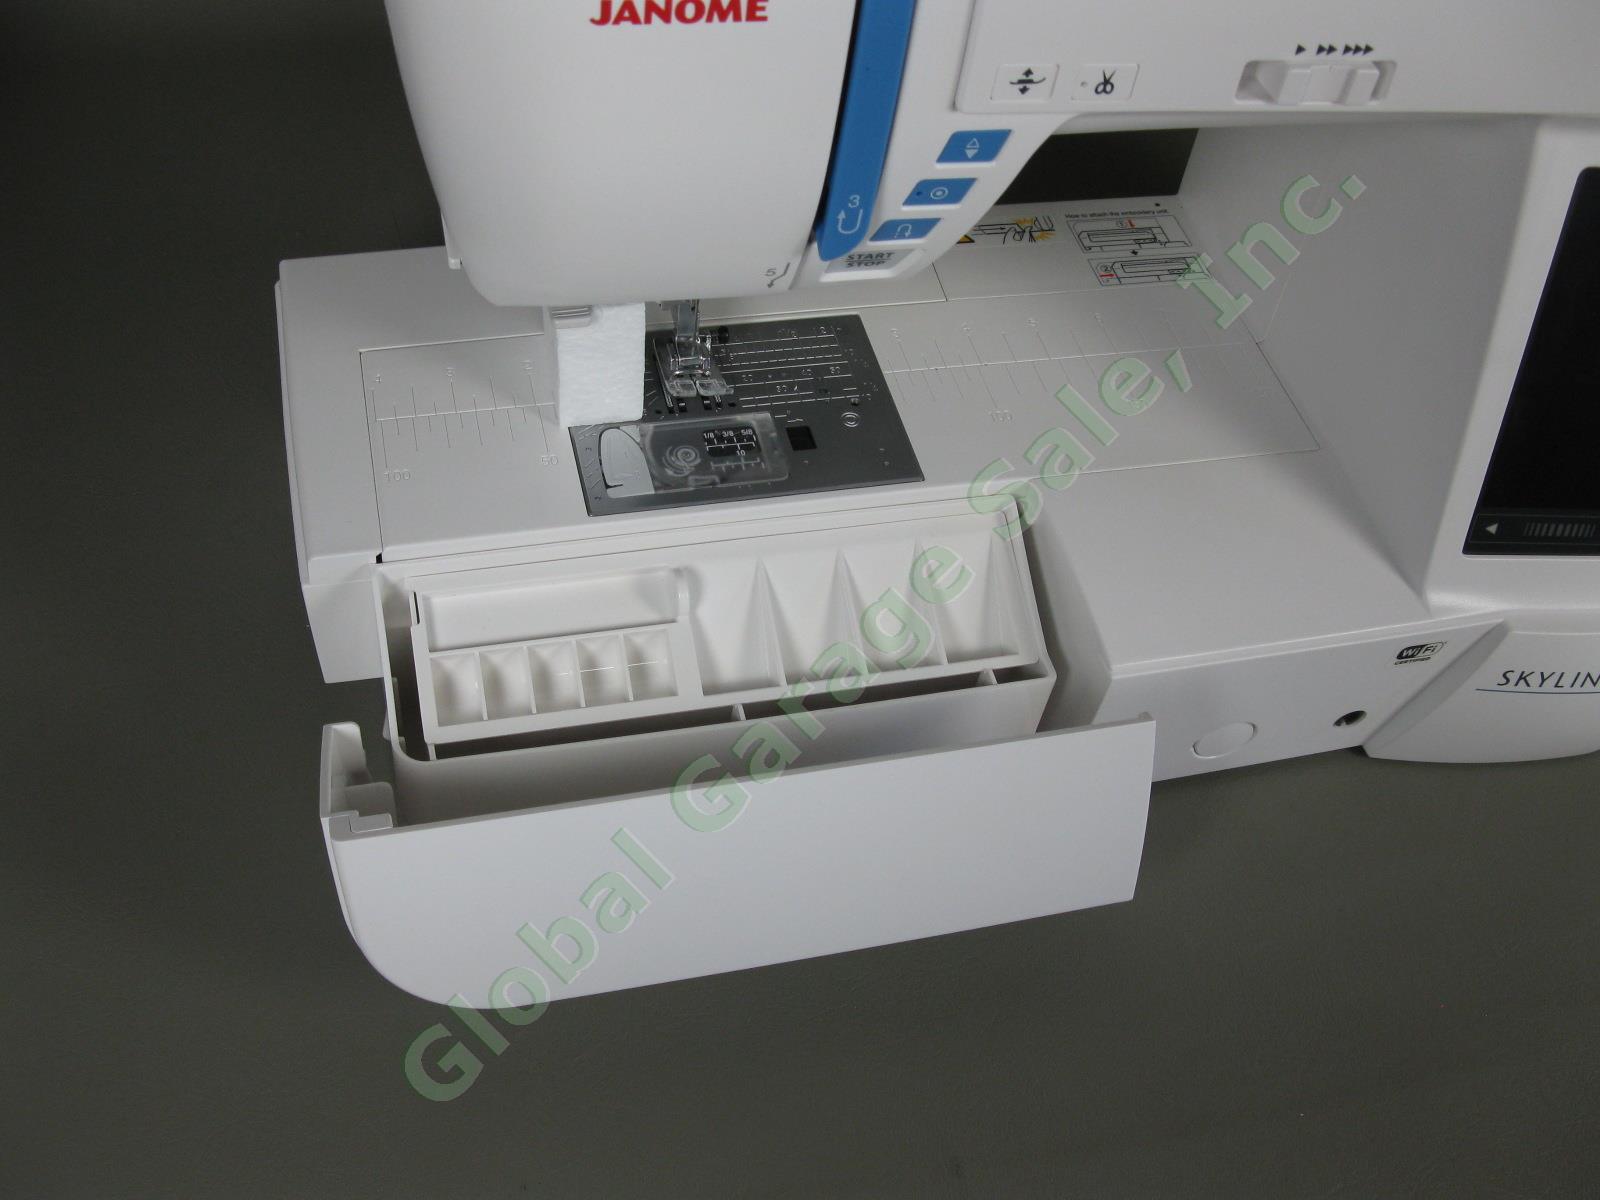 Janome Skyline S9 Sewing + Embroidery Machine Mint Condition! Barely Used! 6